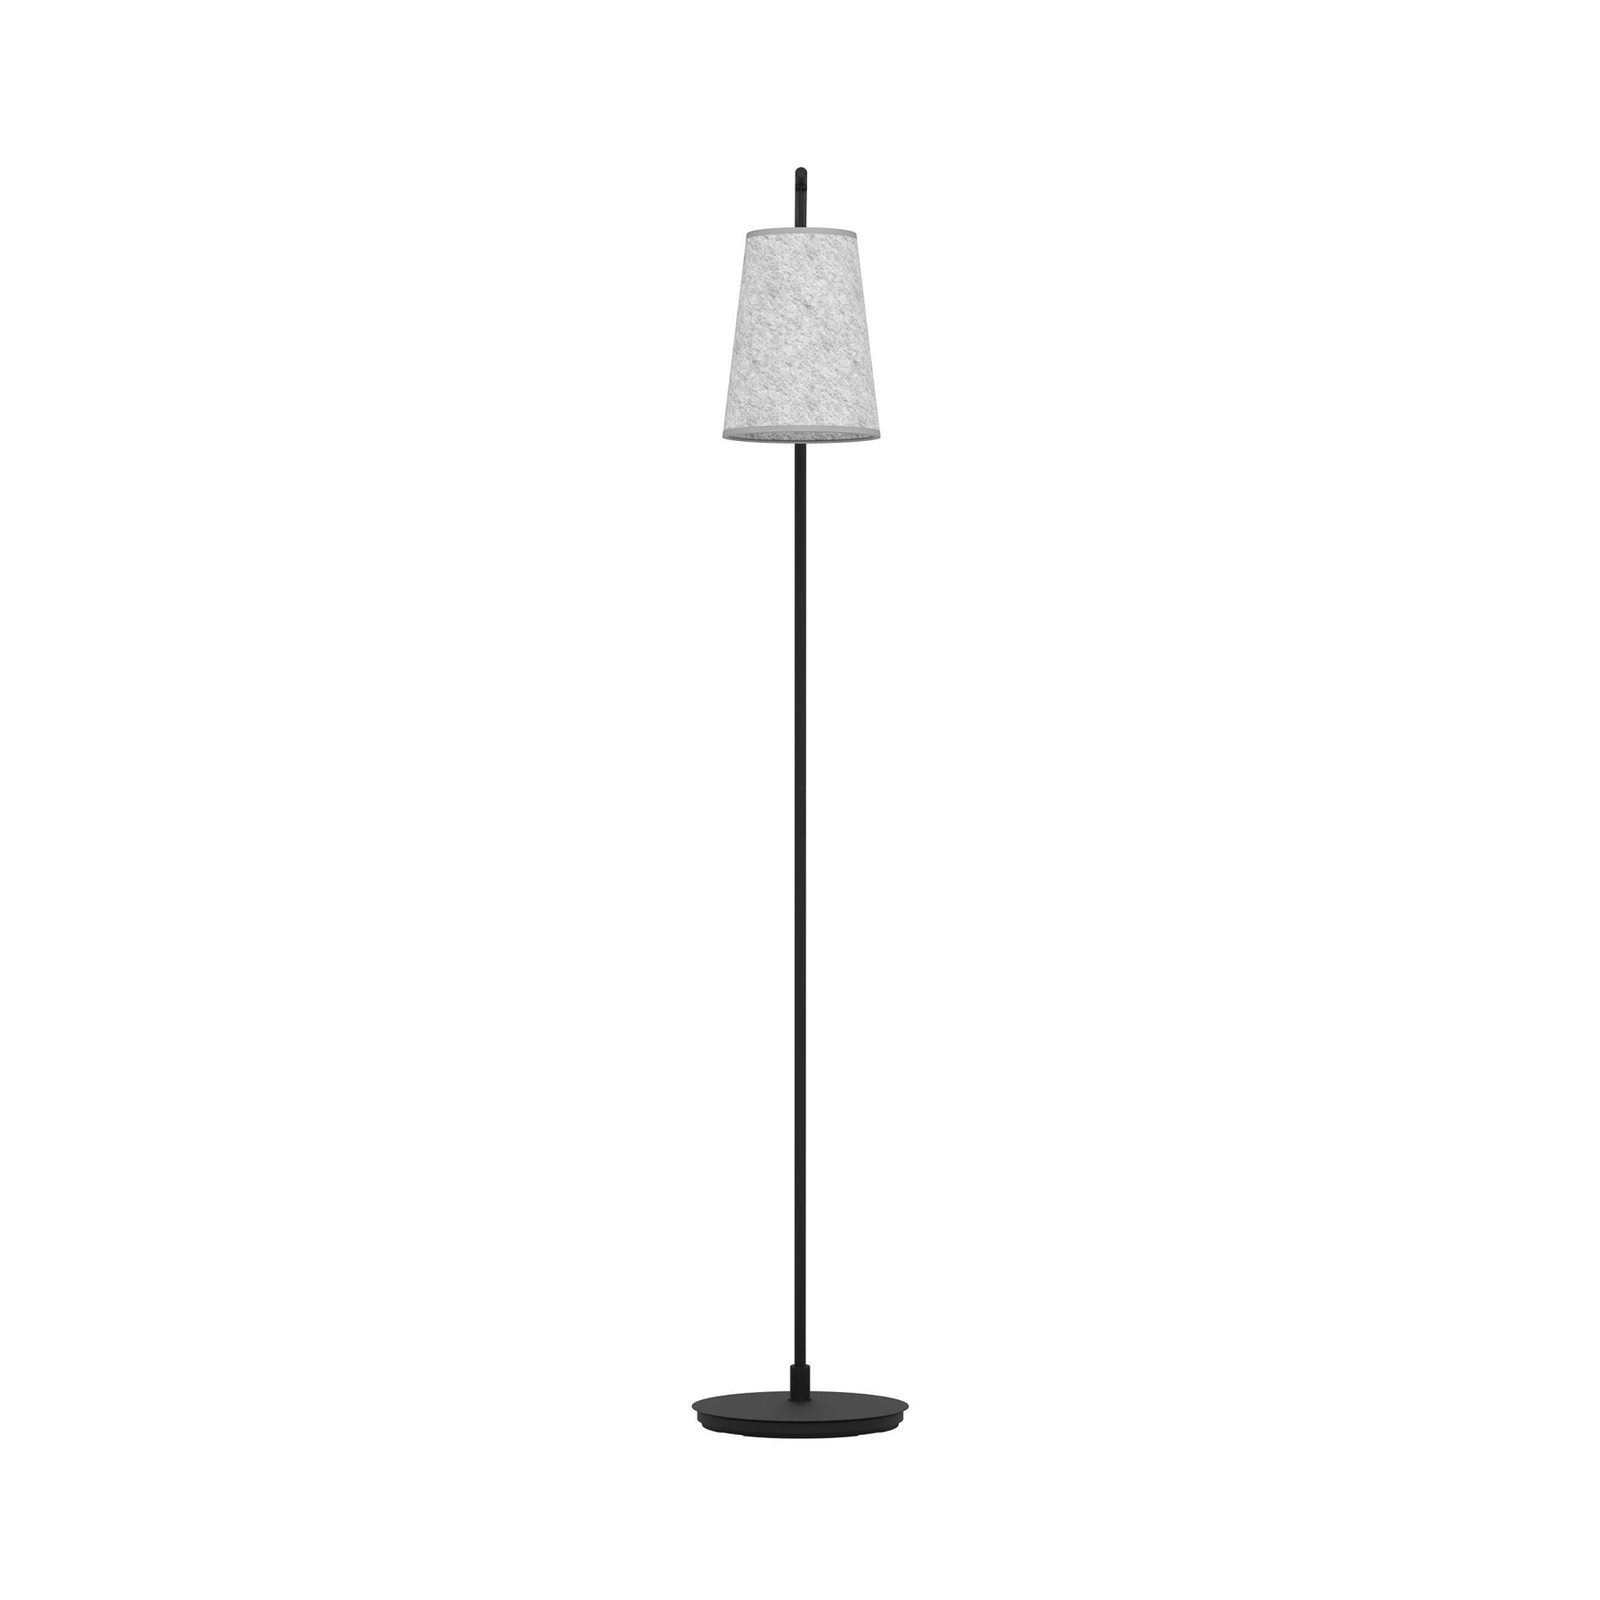 Alsager floor lamp with a felt lampshade